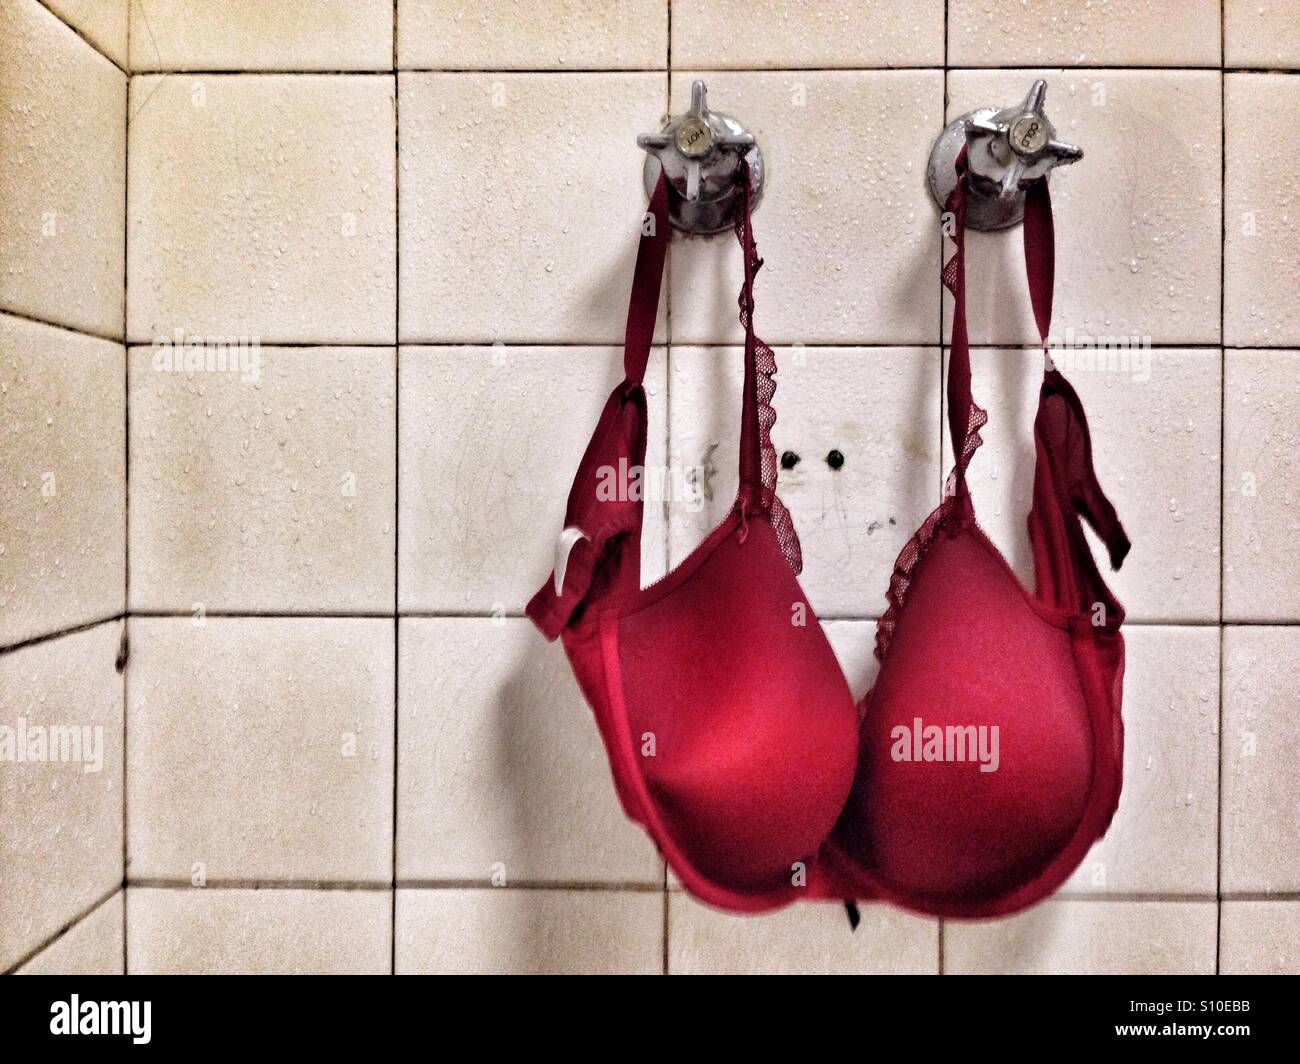 Red bra drying in an old and derelict shower Stock Photo - Alamy